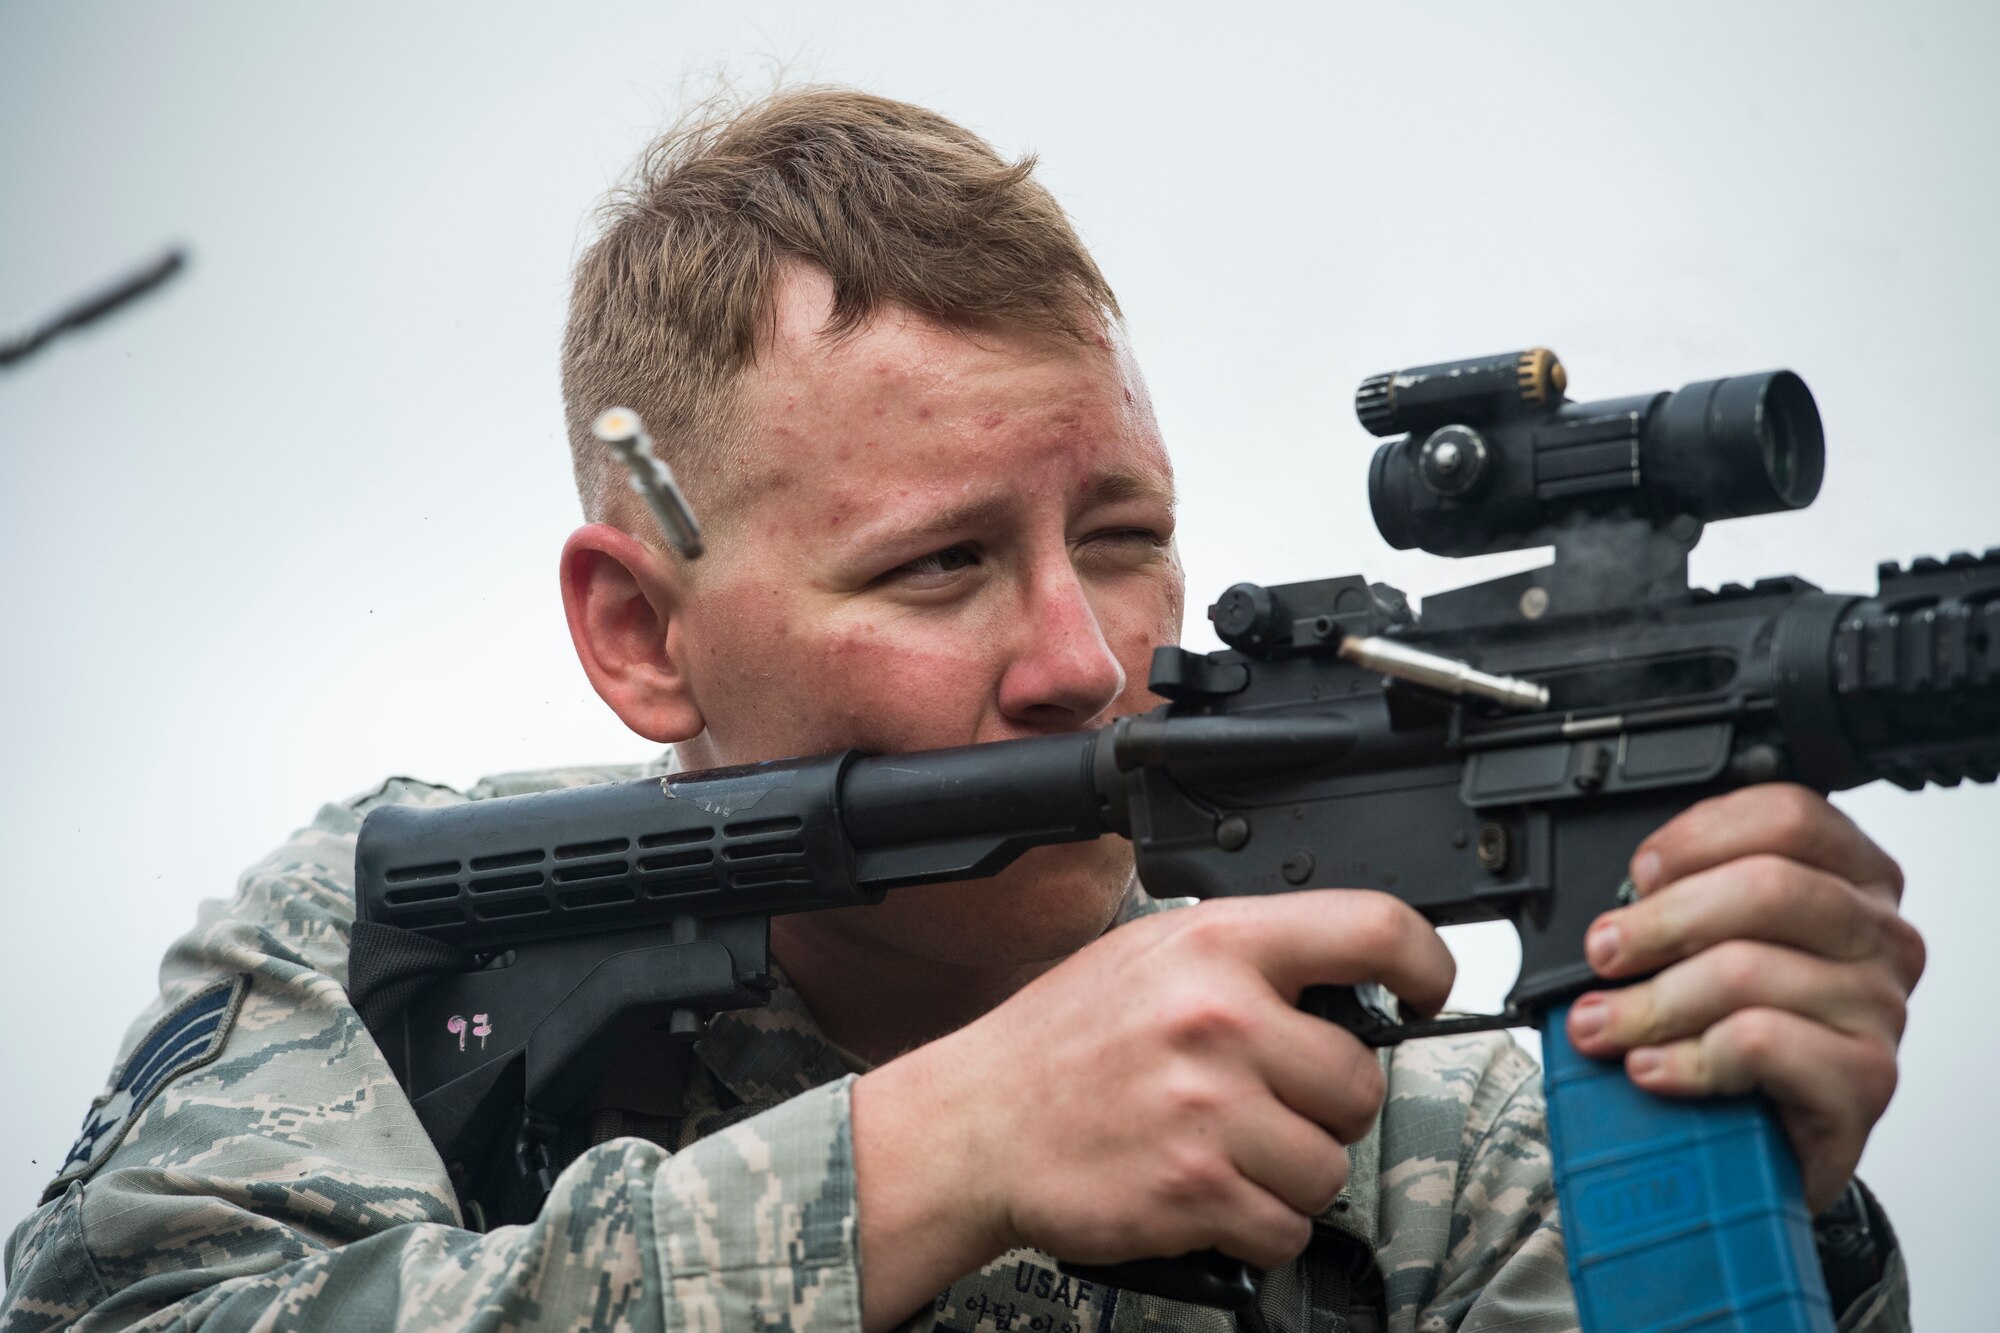 Senior Airman Adam Irwin, 23d Security Forces Squadron installation patrolman, expends extra rounds from an M4 carbine after a training event, Feb. 22, 2018, at Moody Air Force Base, Ga. “Shoot, move, communicate” is a training event that tests participants on their ability to move from barricade to barricade as a team. While one member provided covering fire the others advanced on the enemy, then retreated from the scenario while they maintained cover fire. Security Forces members would employ these tactics anytime they’re under enemy fire. (U.S. Air Force photo by Senior Airman Janiqua P. Robinson)